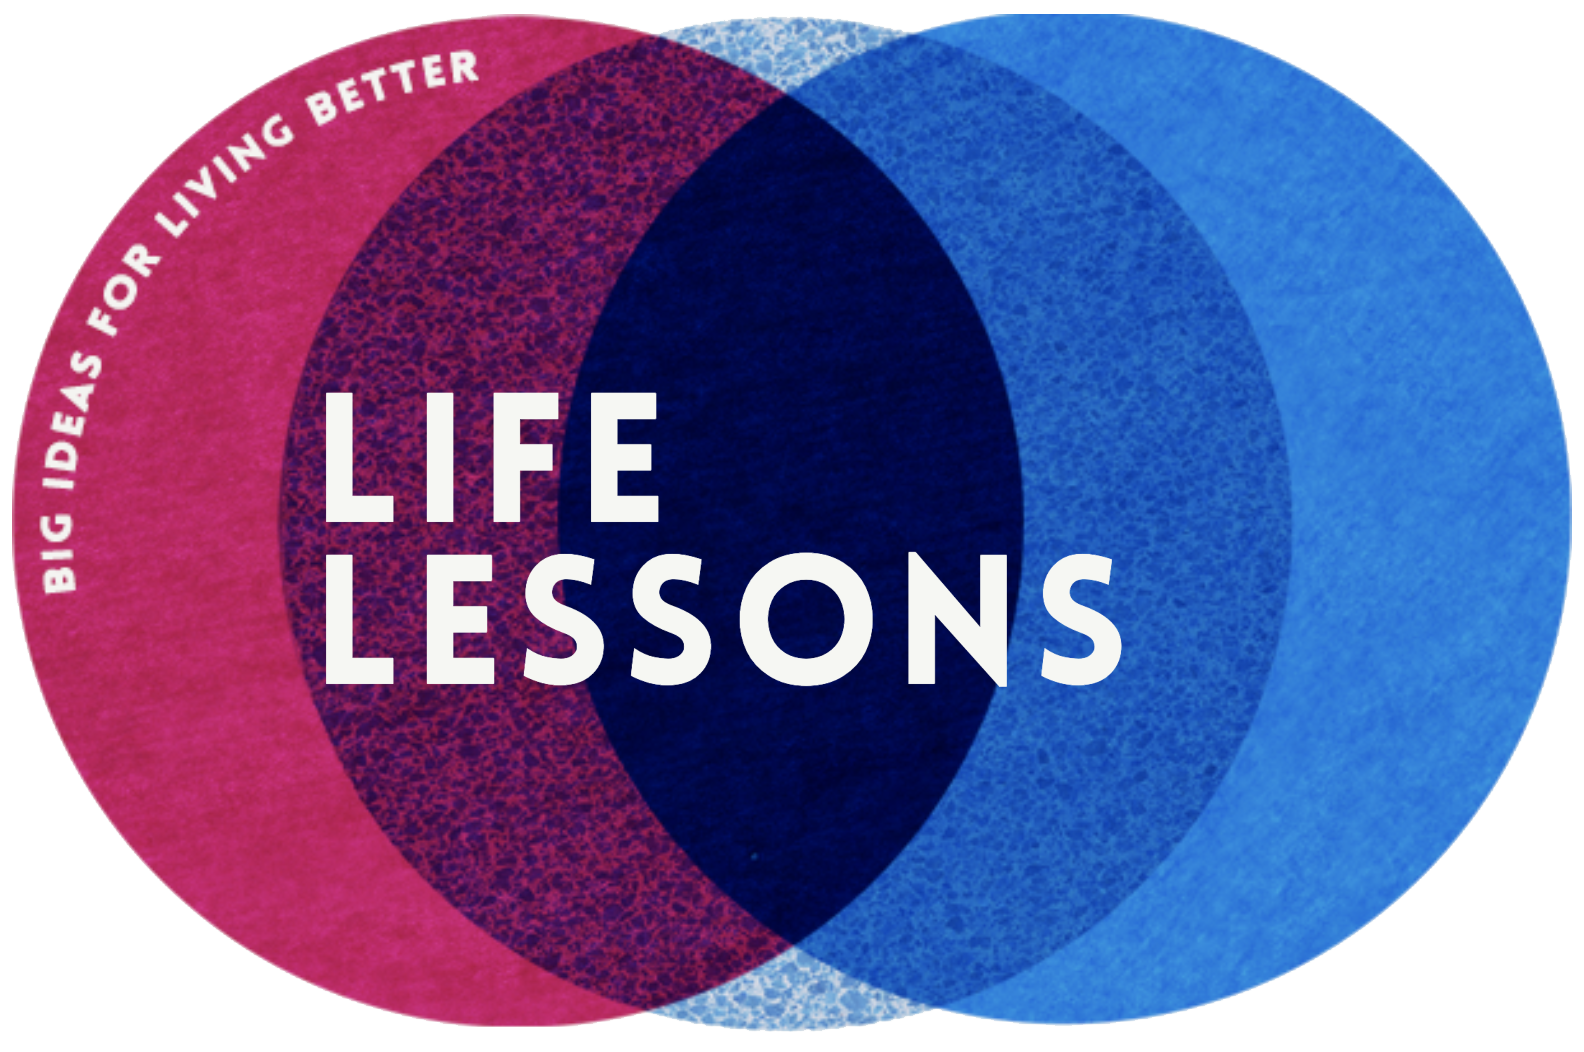 Life lessons feastival - thrive magazine